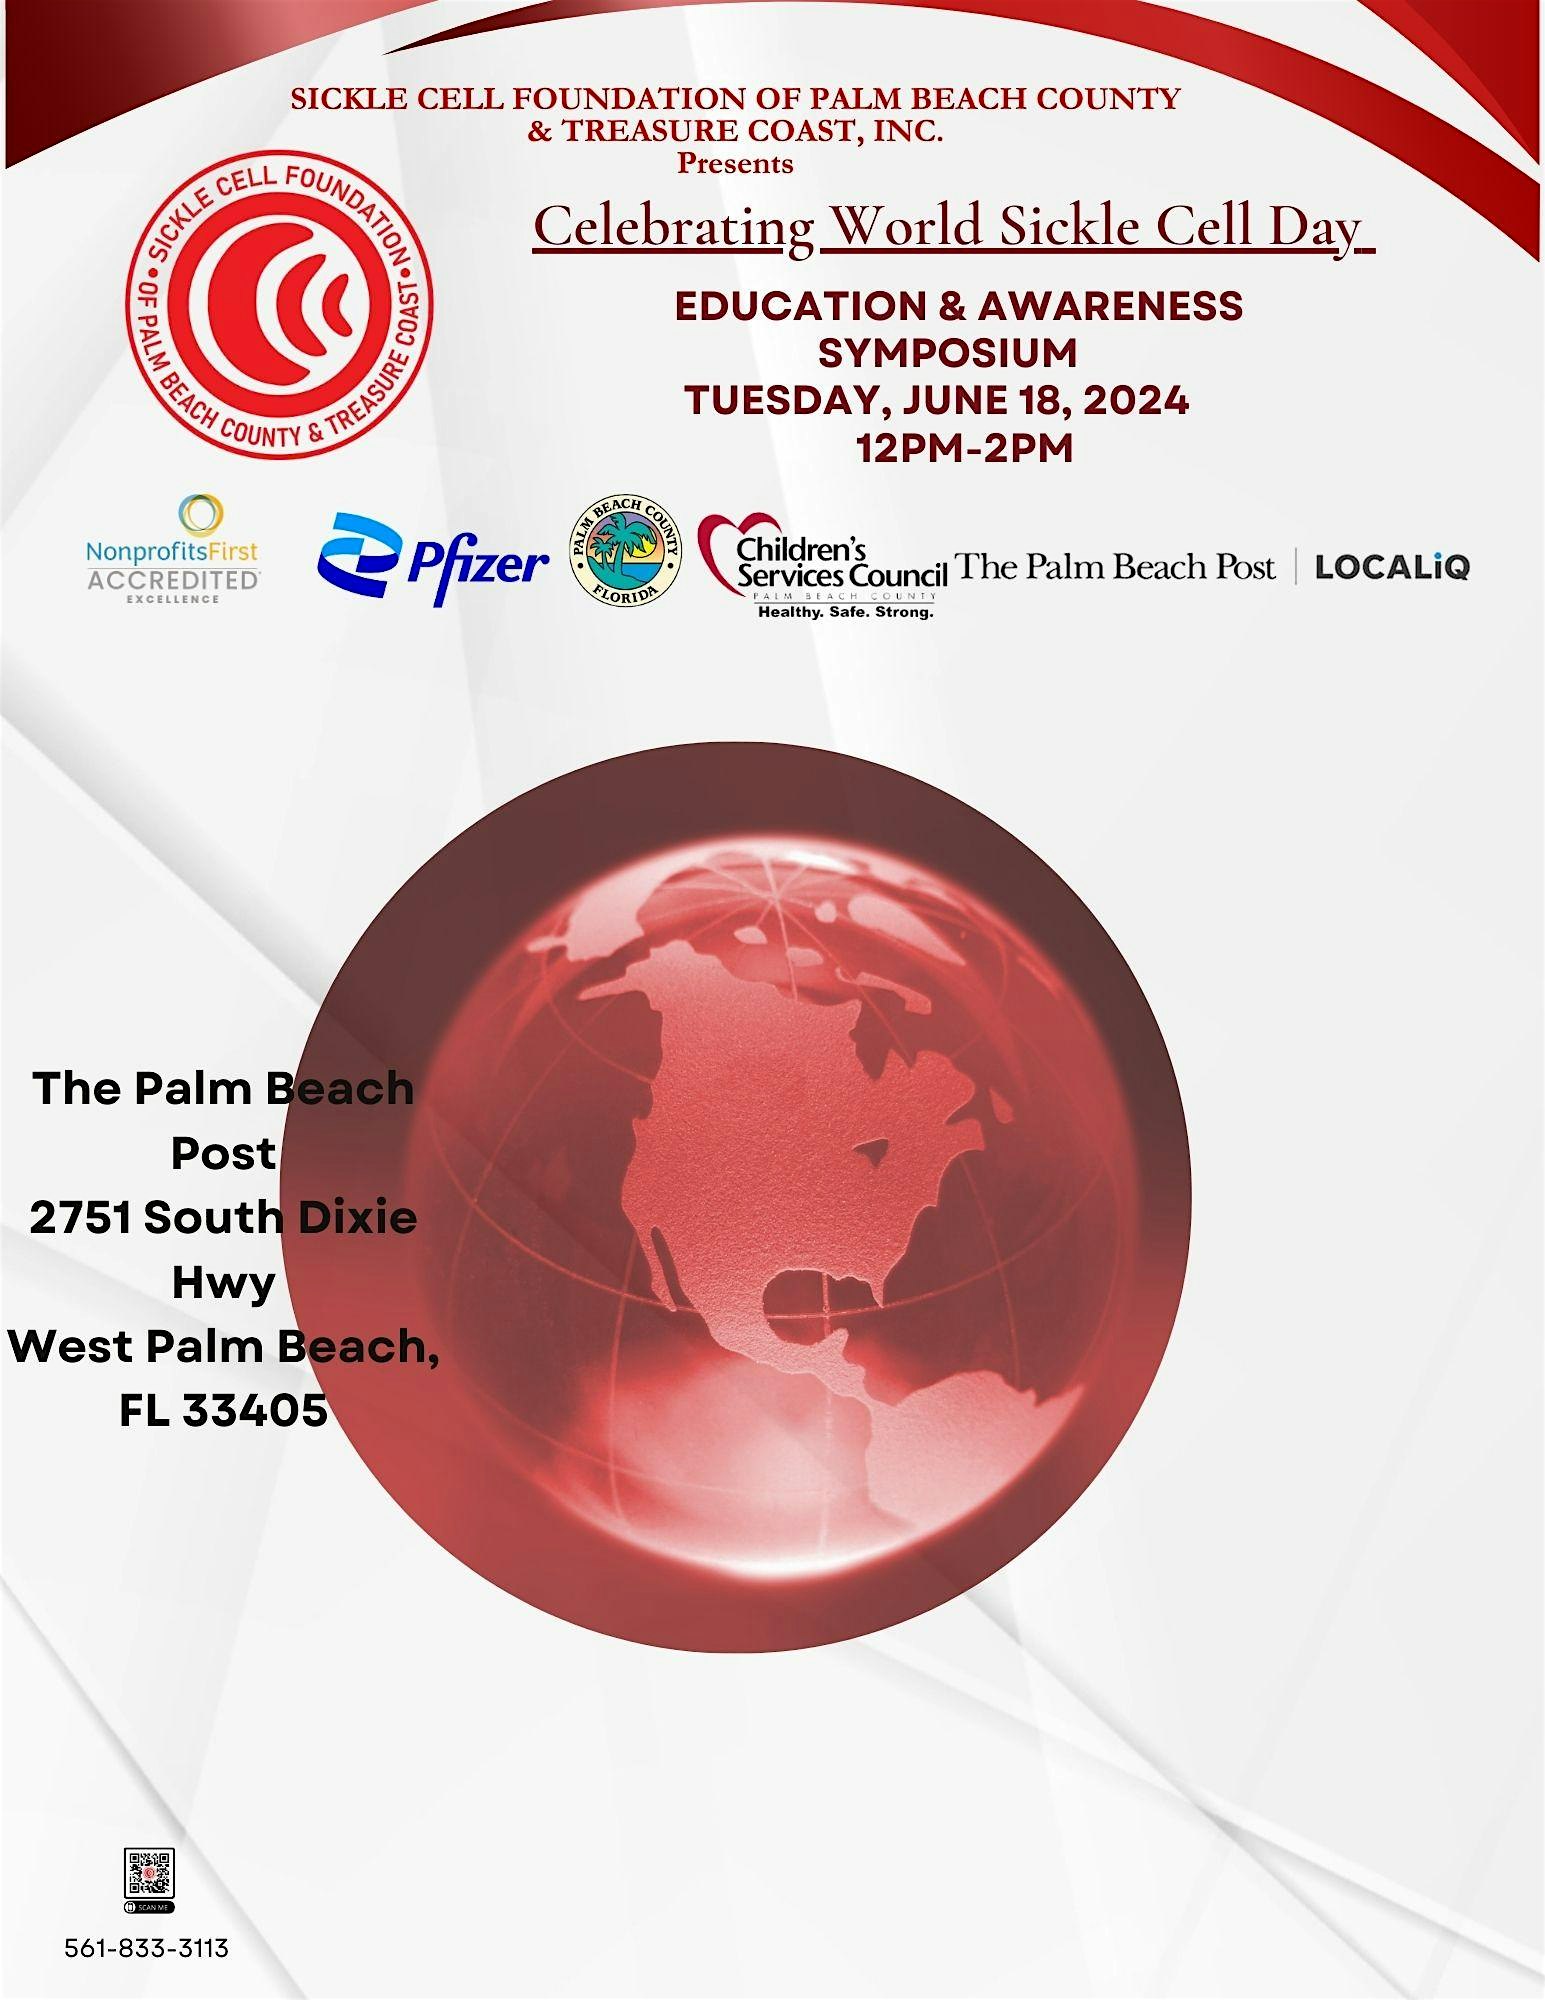 Sickle Cell Education & Awareness Symposium